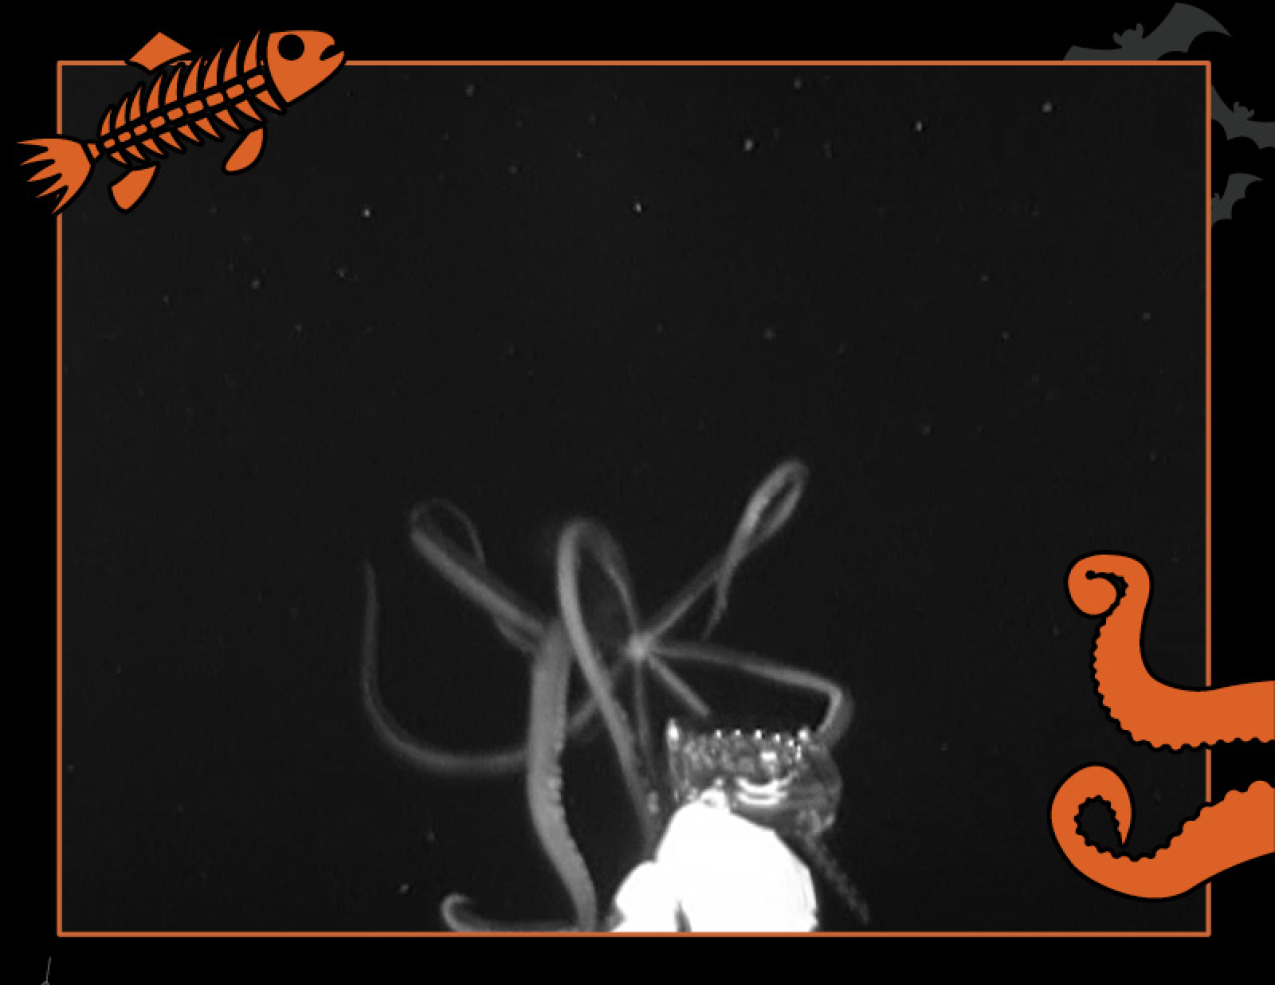 A giant squid emerges from the deep ocean and wraps its tentacles around the underwater camera. Border of the photo is black with orange sea creature graphics of octopus tentacles and a fish skeleton. Text: Rare footage of giant squid, #NOAASpookyScience with NOAA logo.